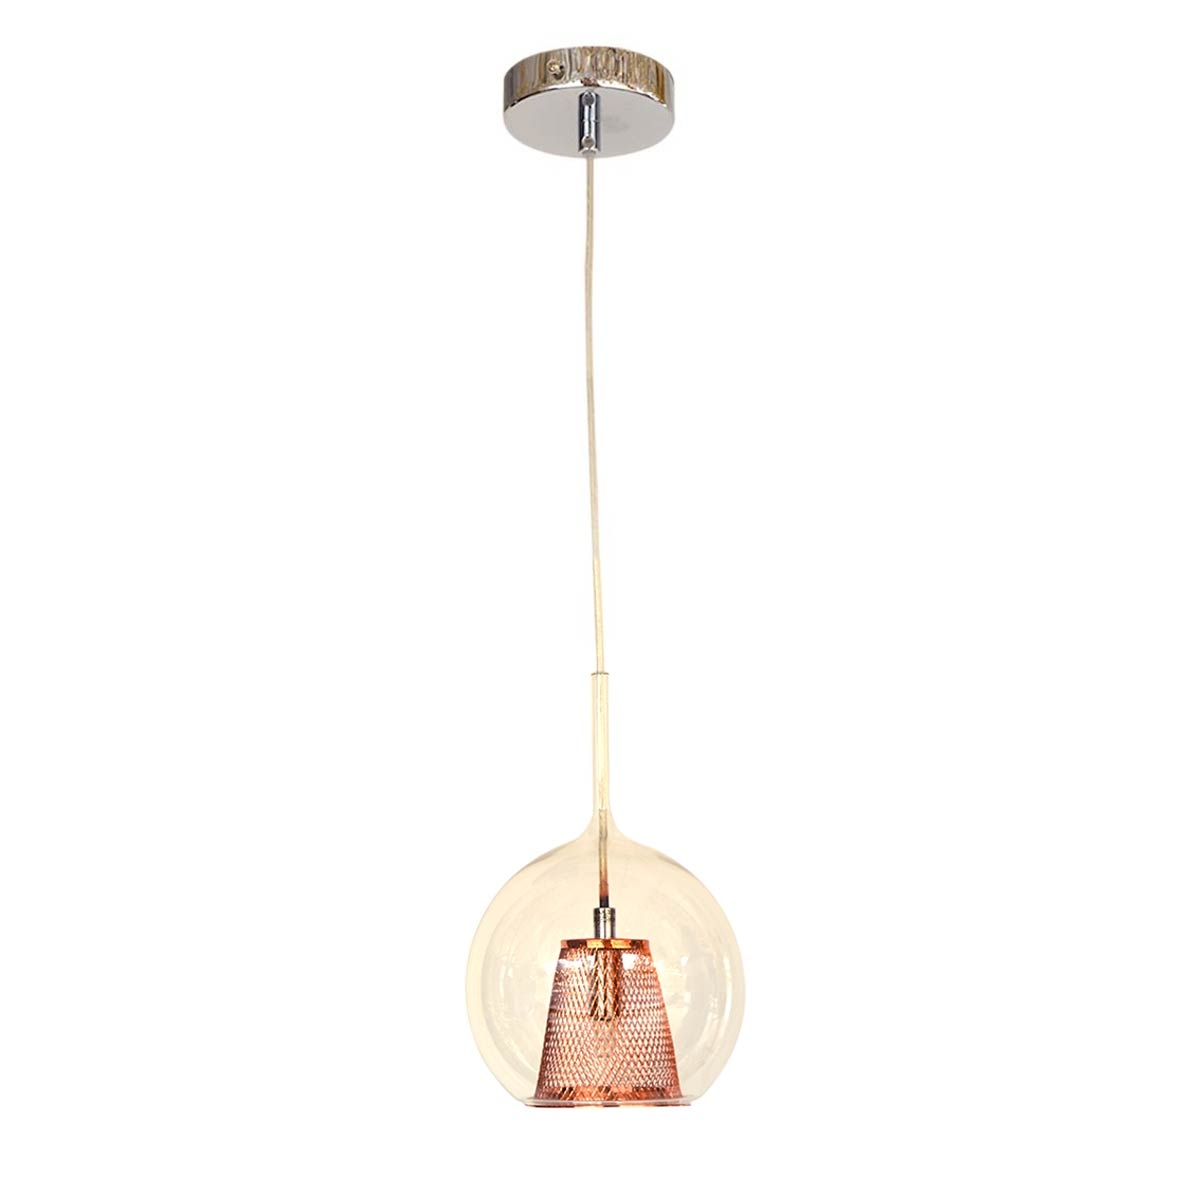 Modern Yeon Gee Pendant Light  MD16002005-1B-With lamps 1xG9-Rose Gold